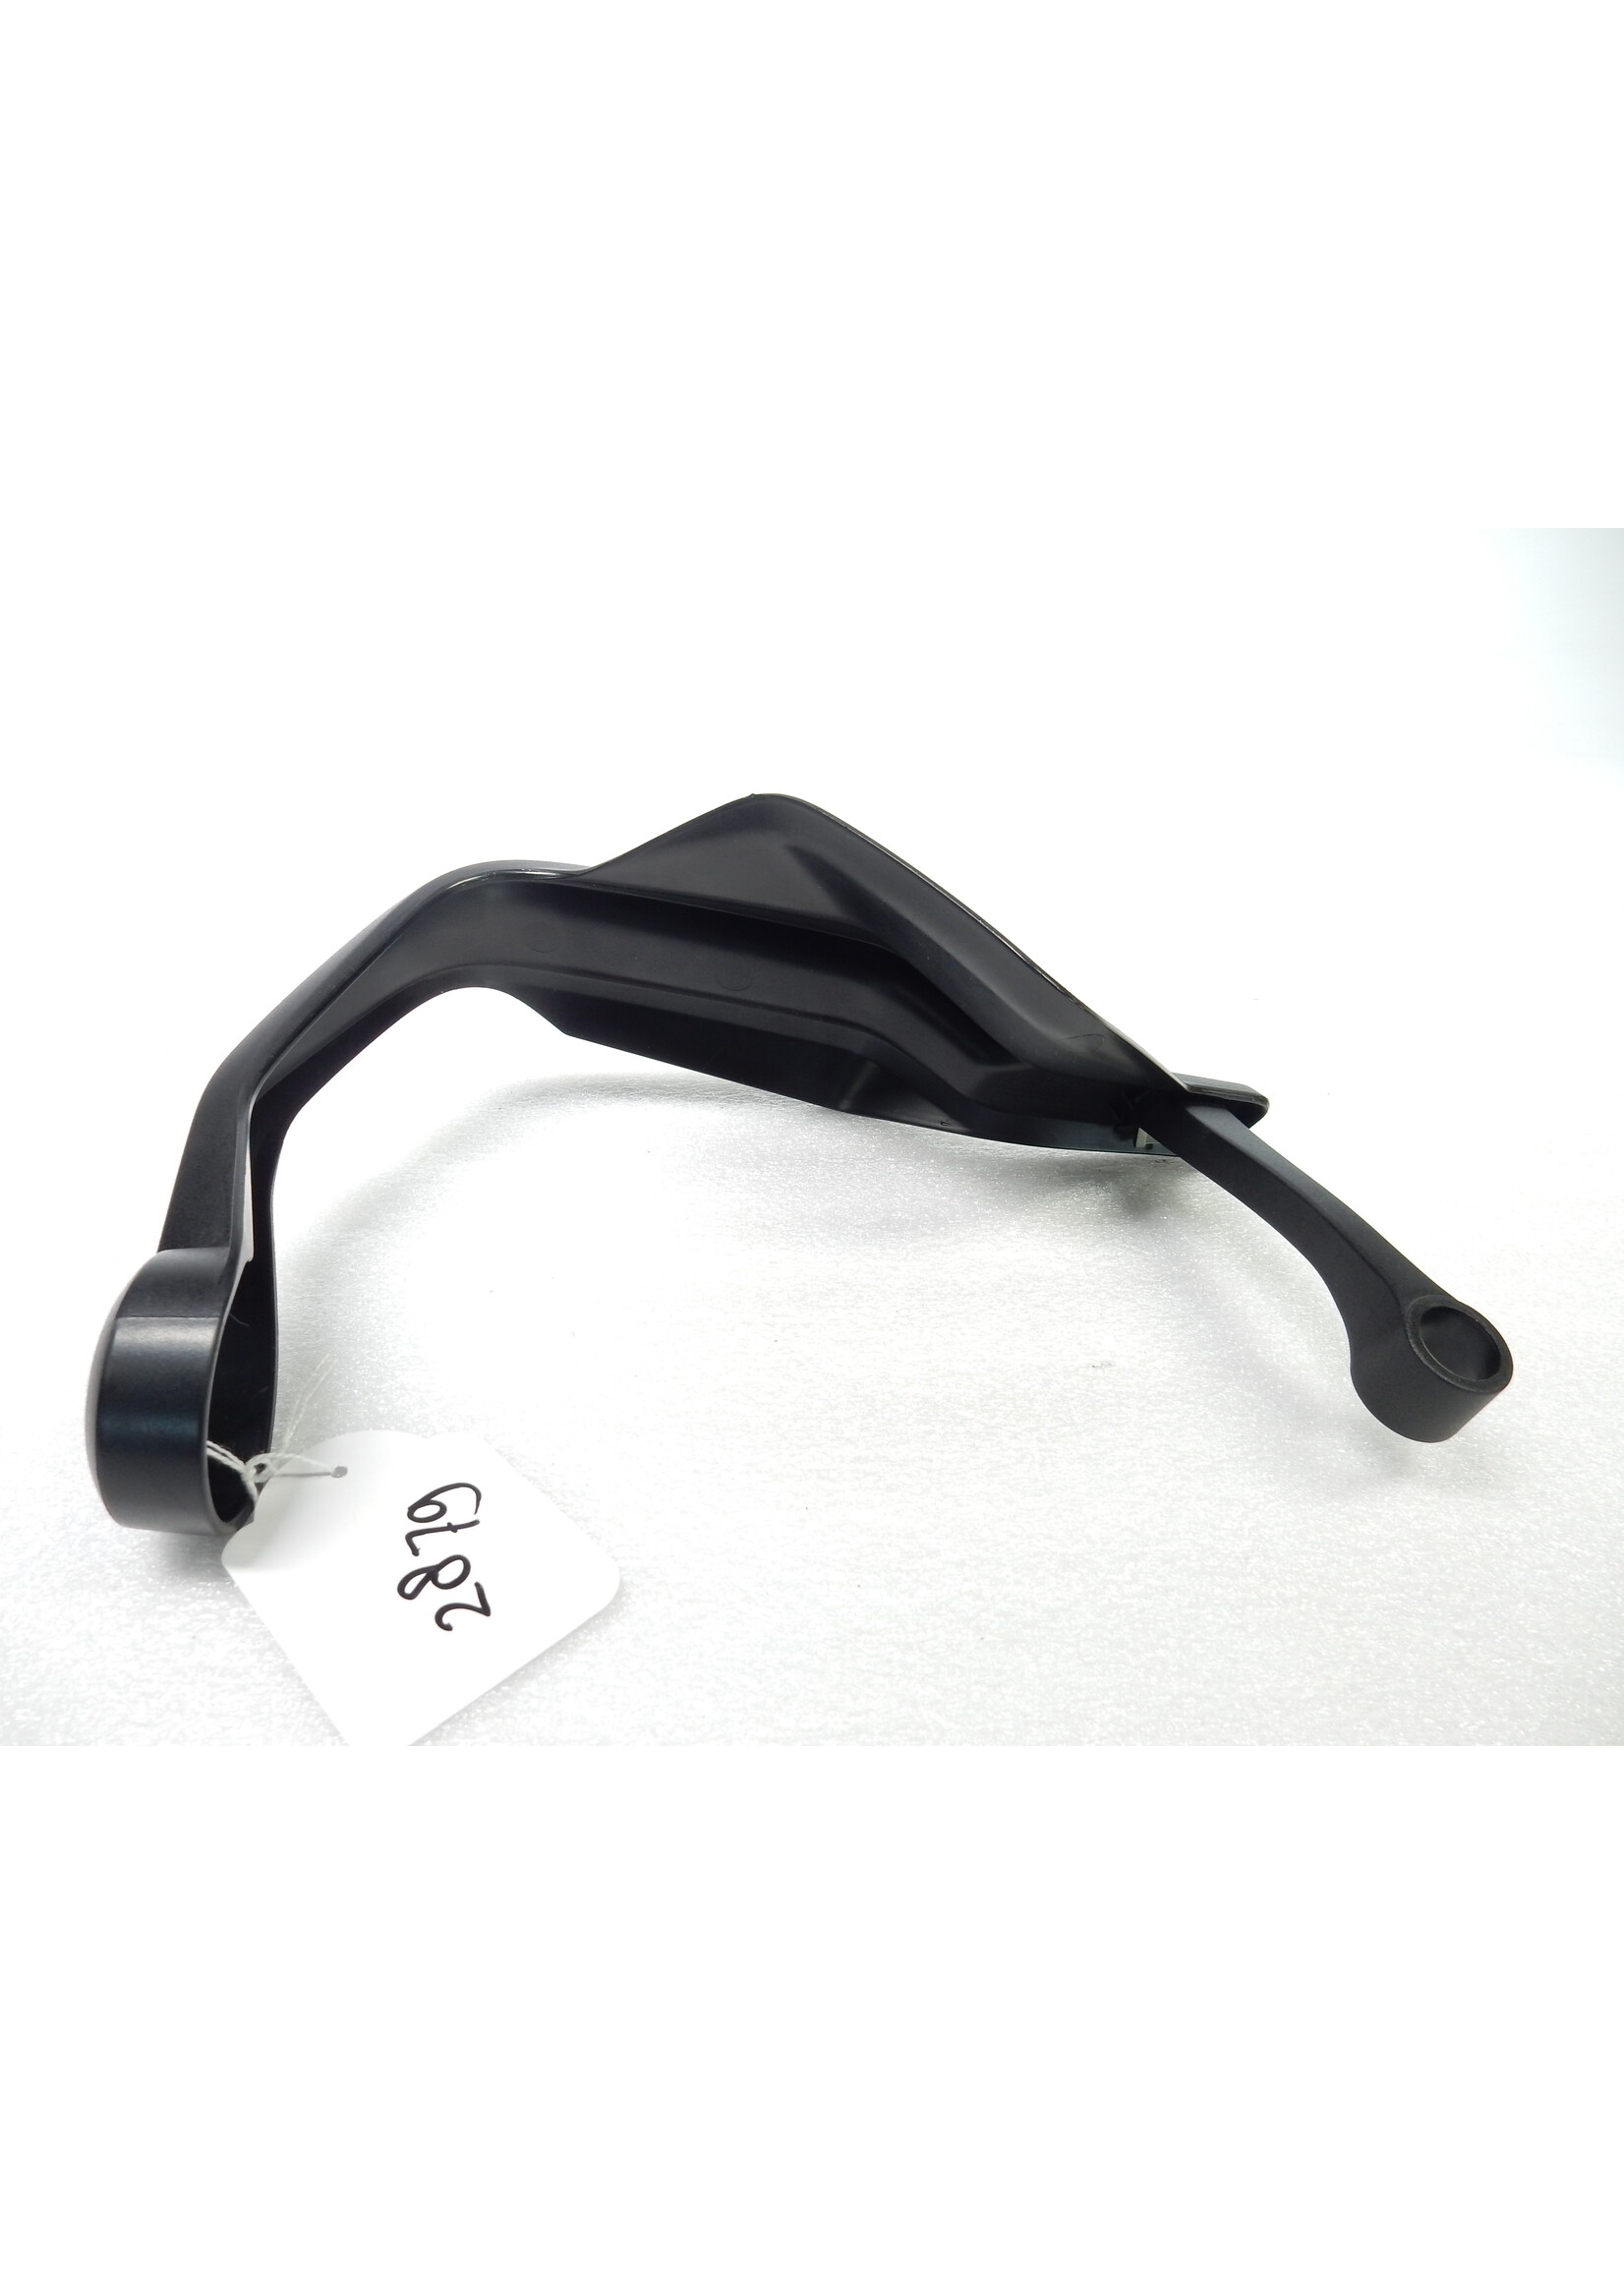 BMW BMW F 750 GS Hand protector left / 32718563803